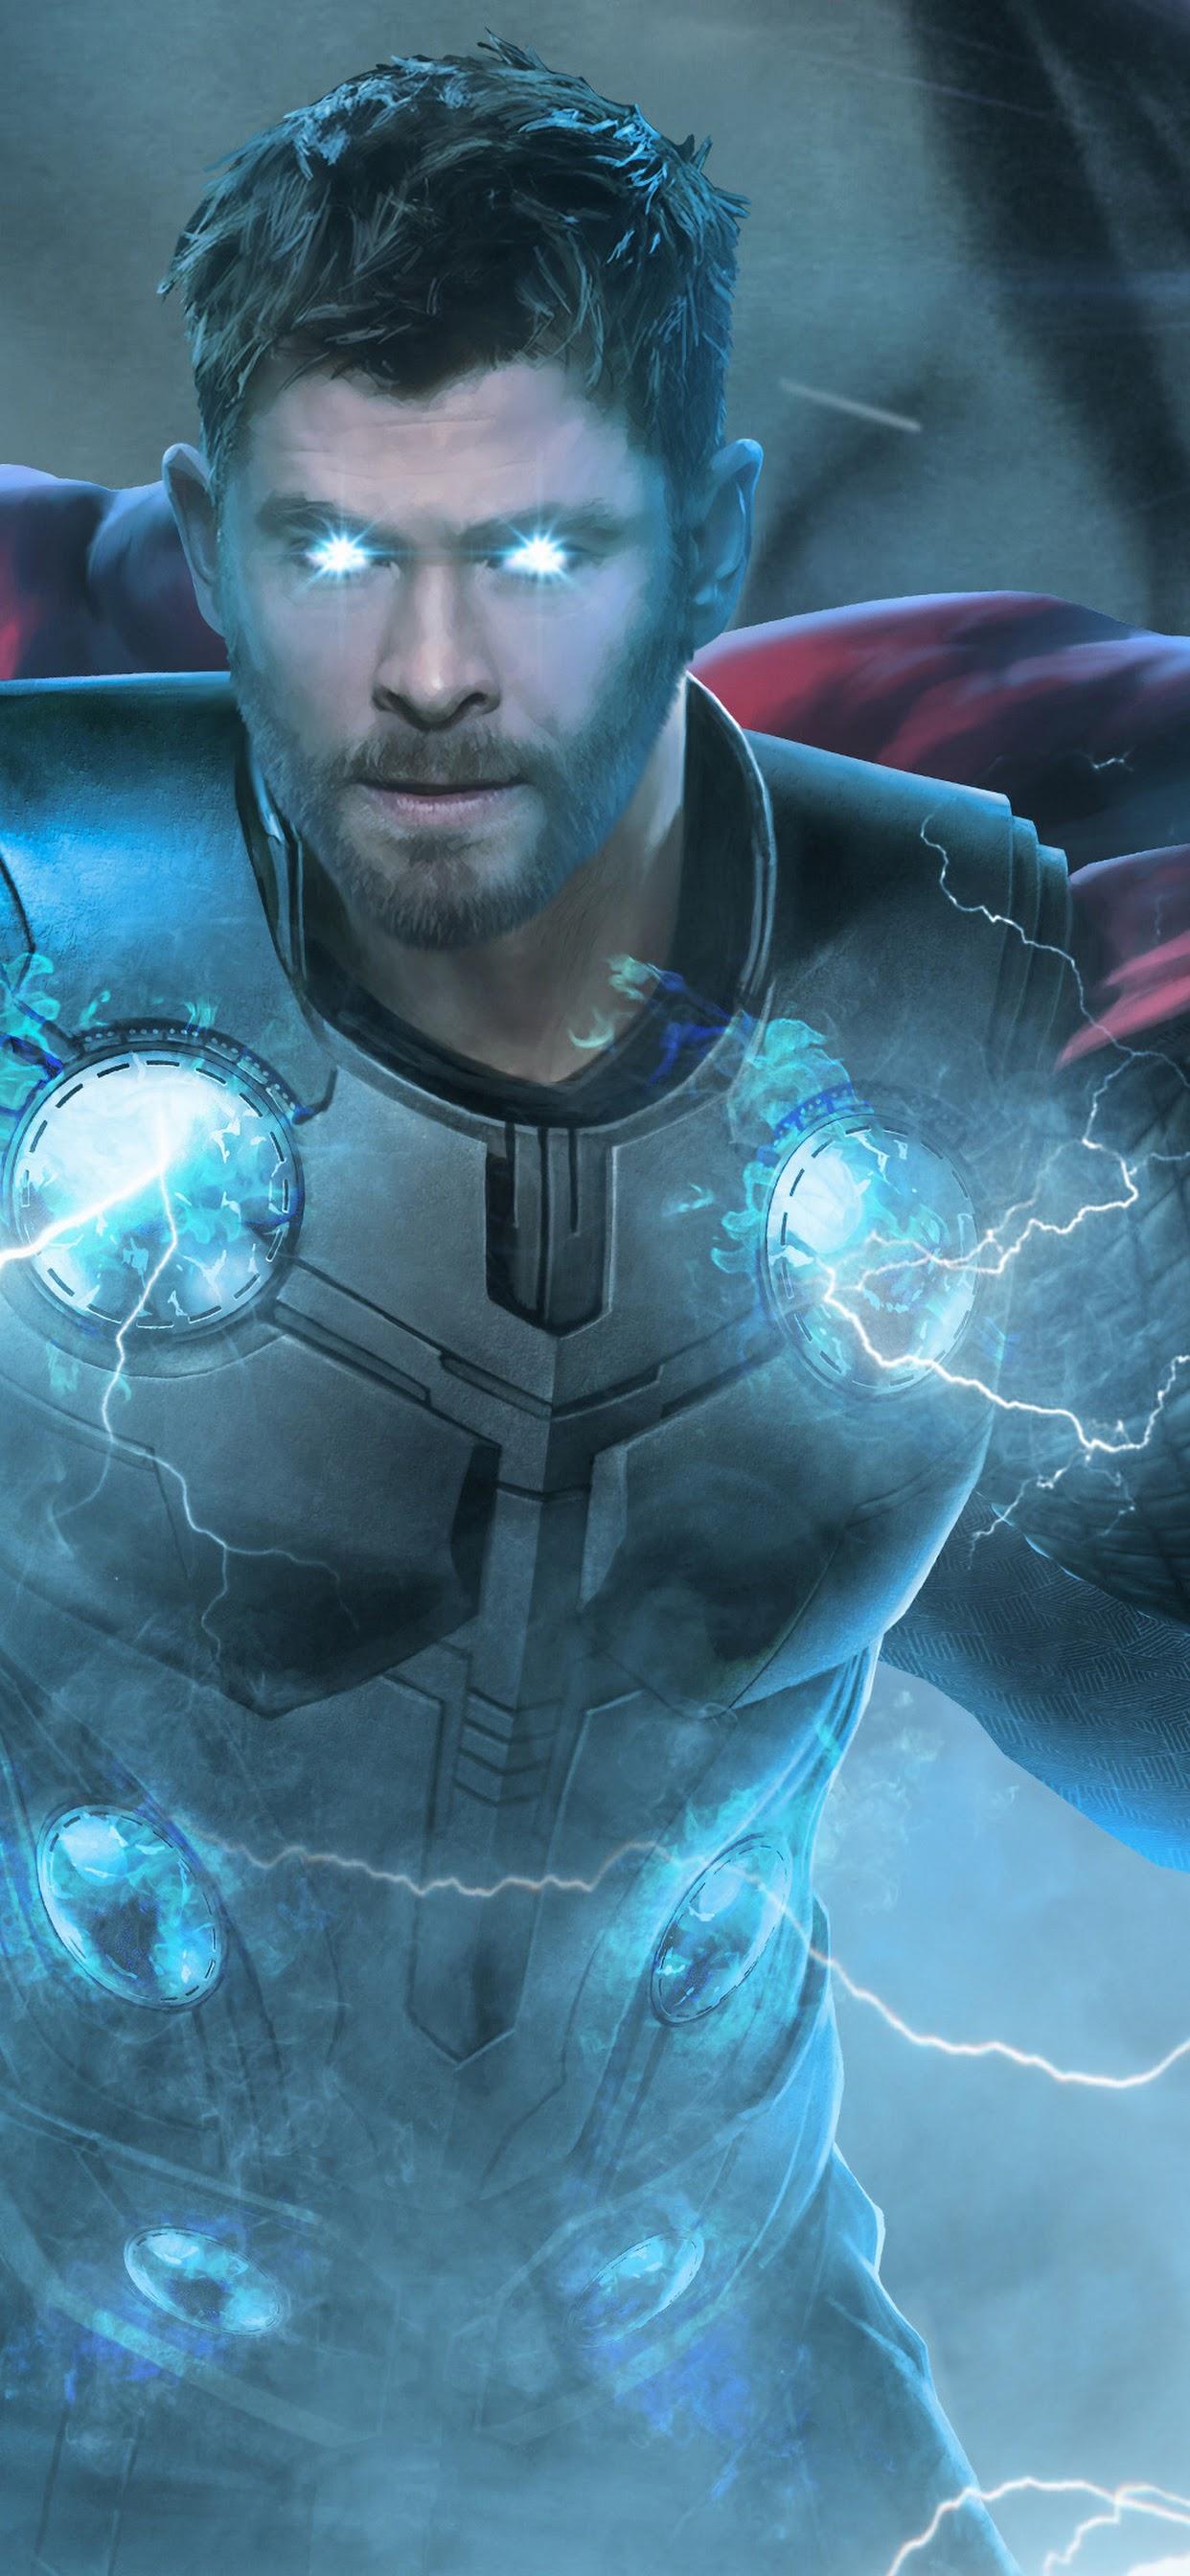 Thor IPhone Wallpaper (81+ images)